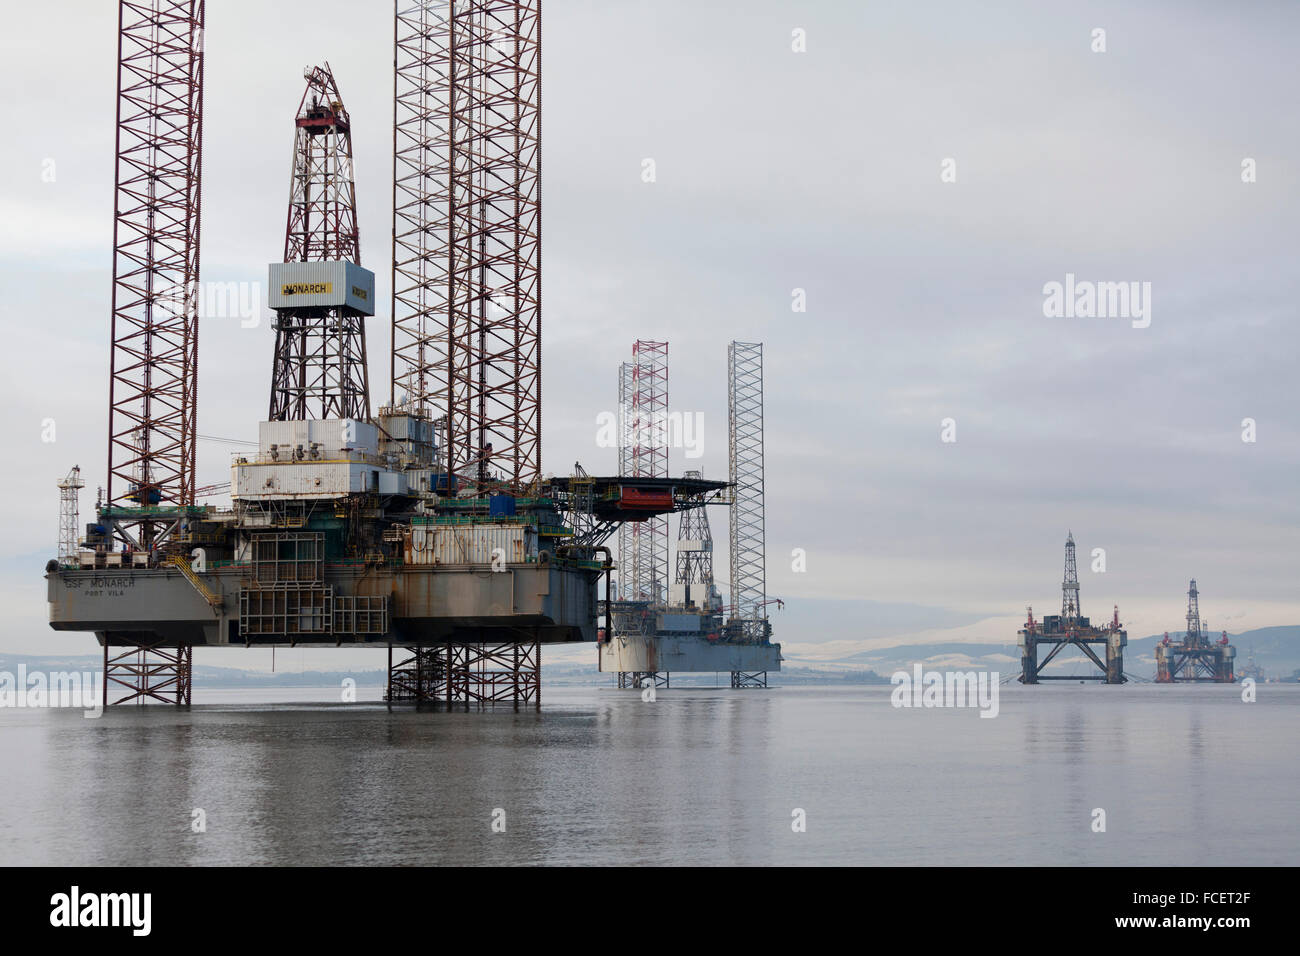 Oil rigs in the Cromarty Firth, Scotland Stock Photo